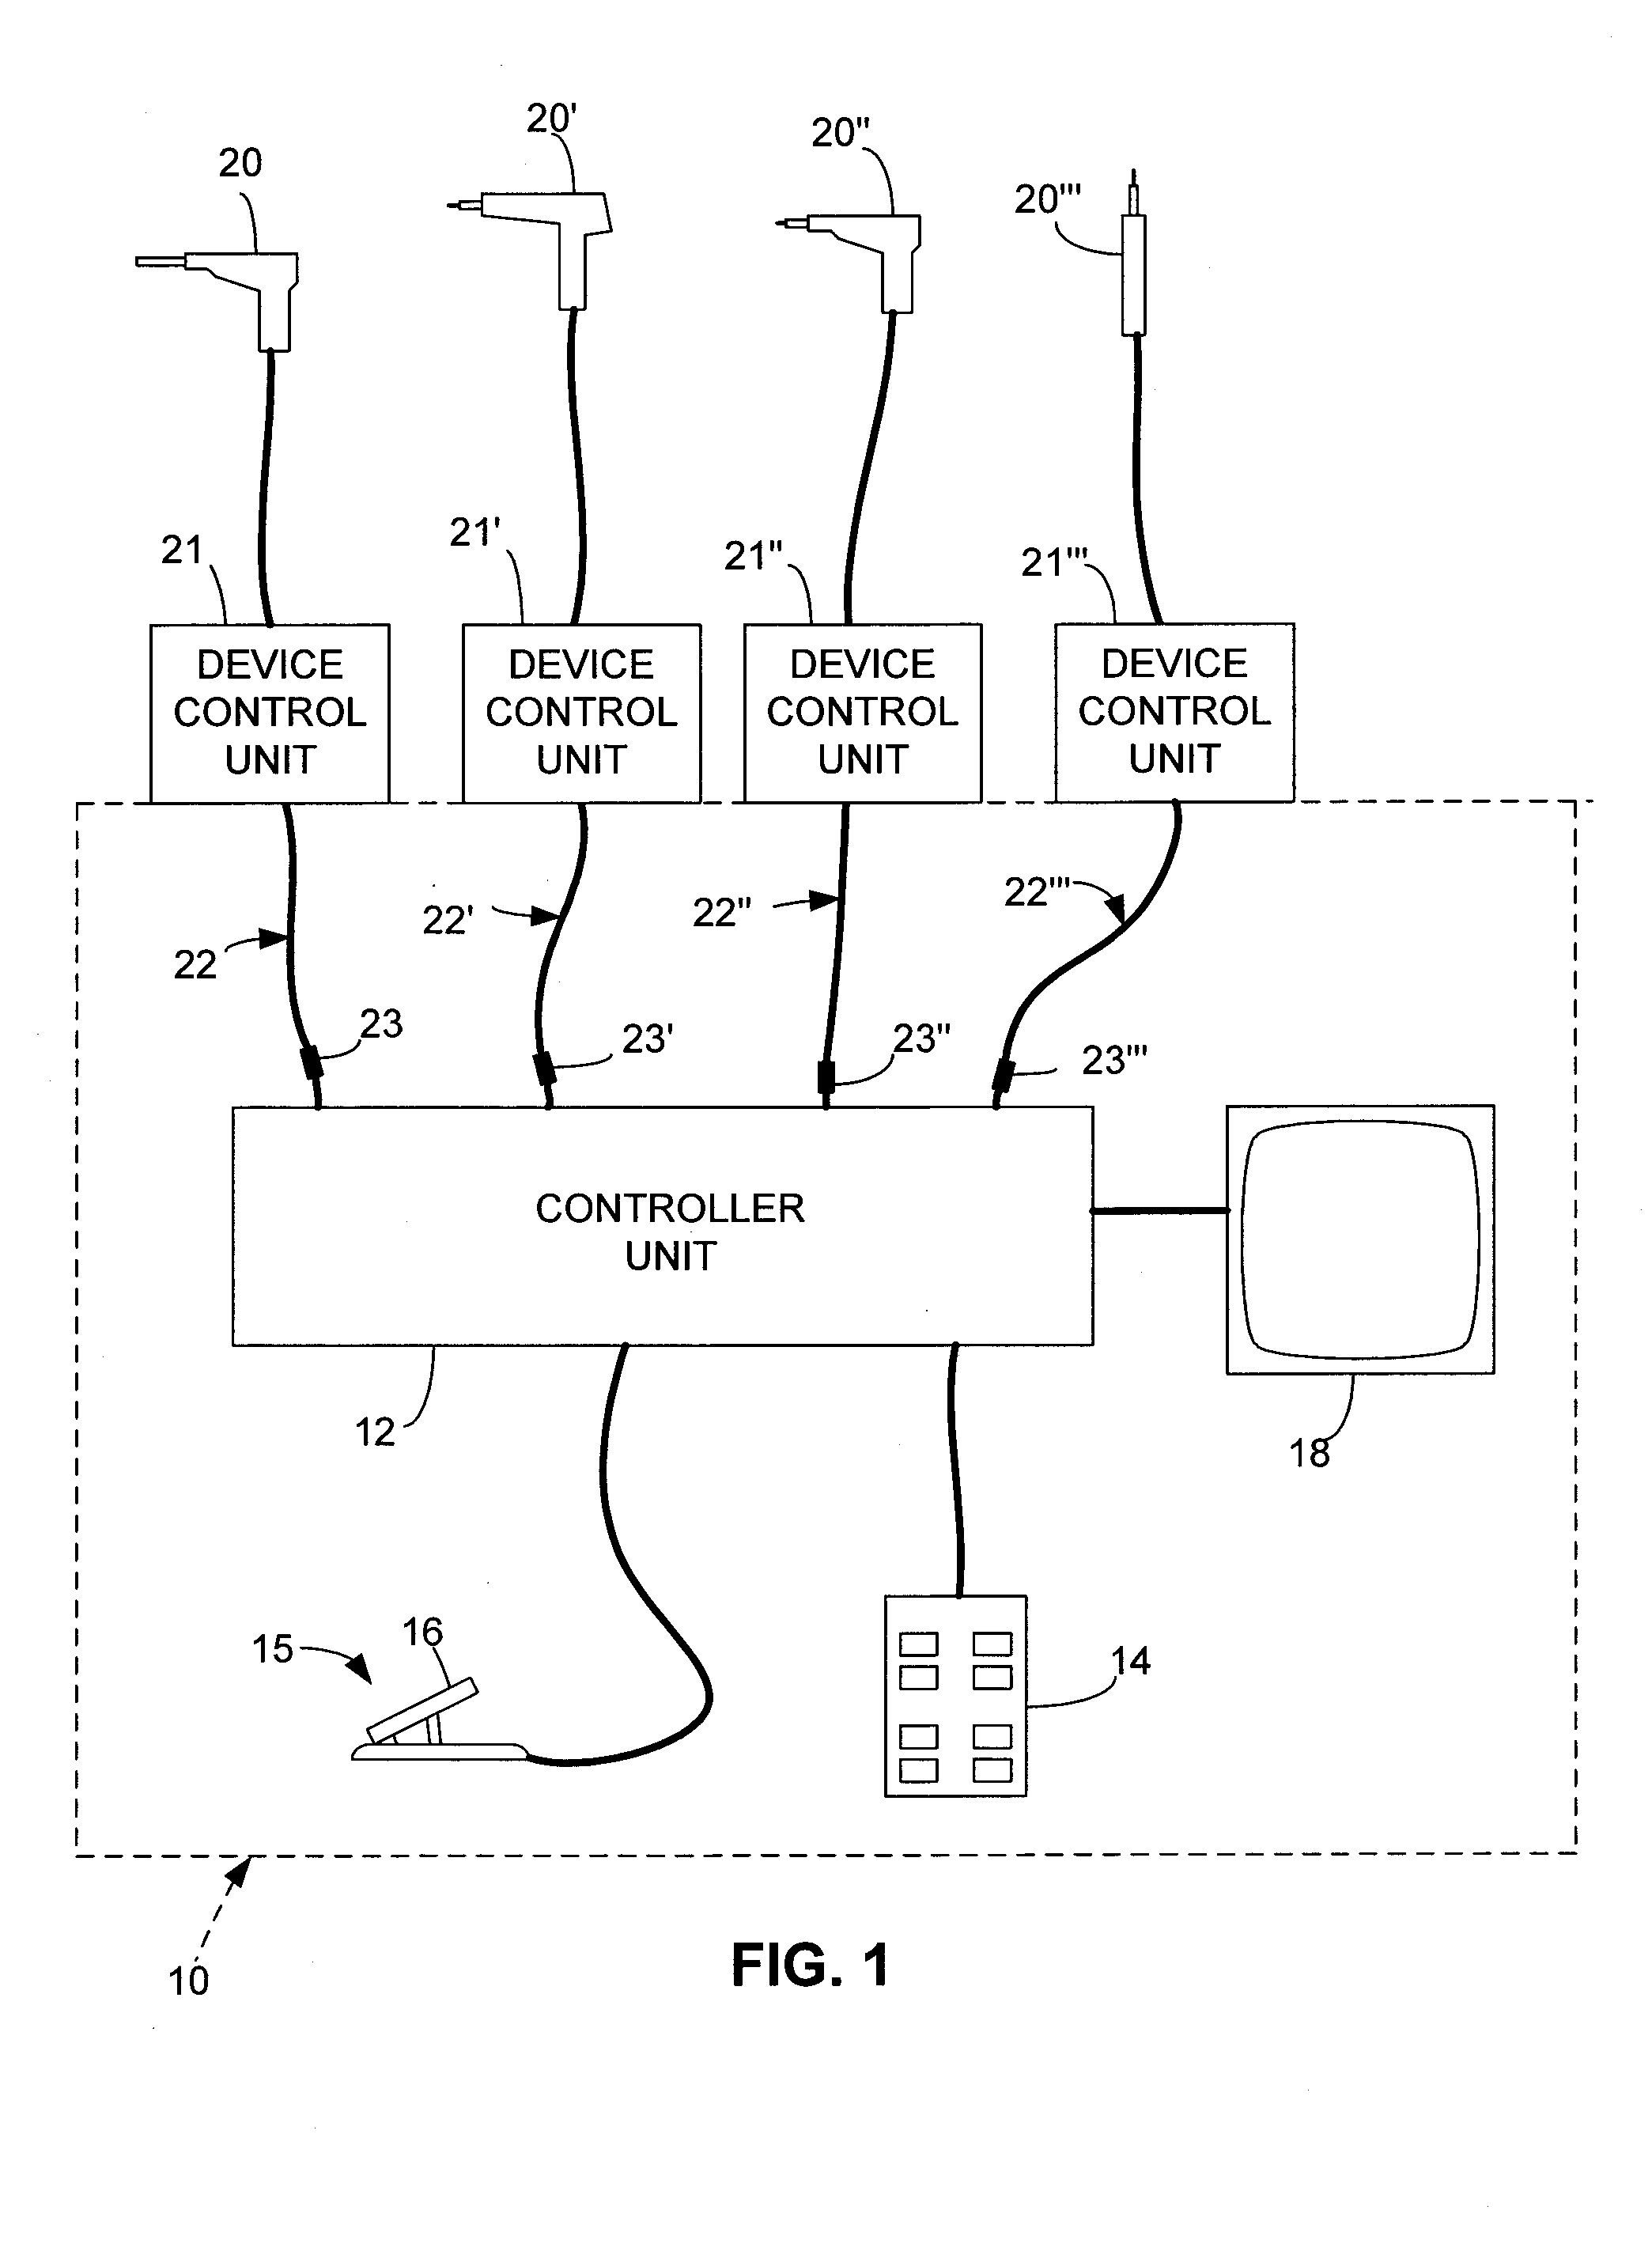 Electrosurgical control system